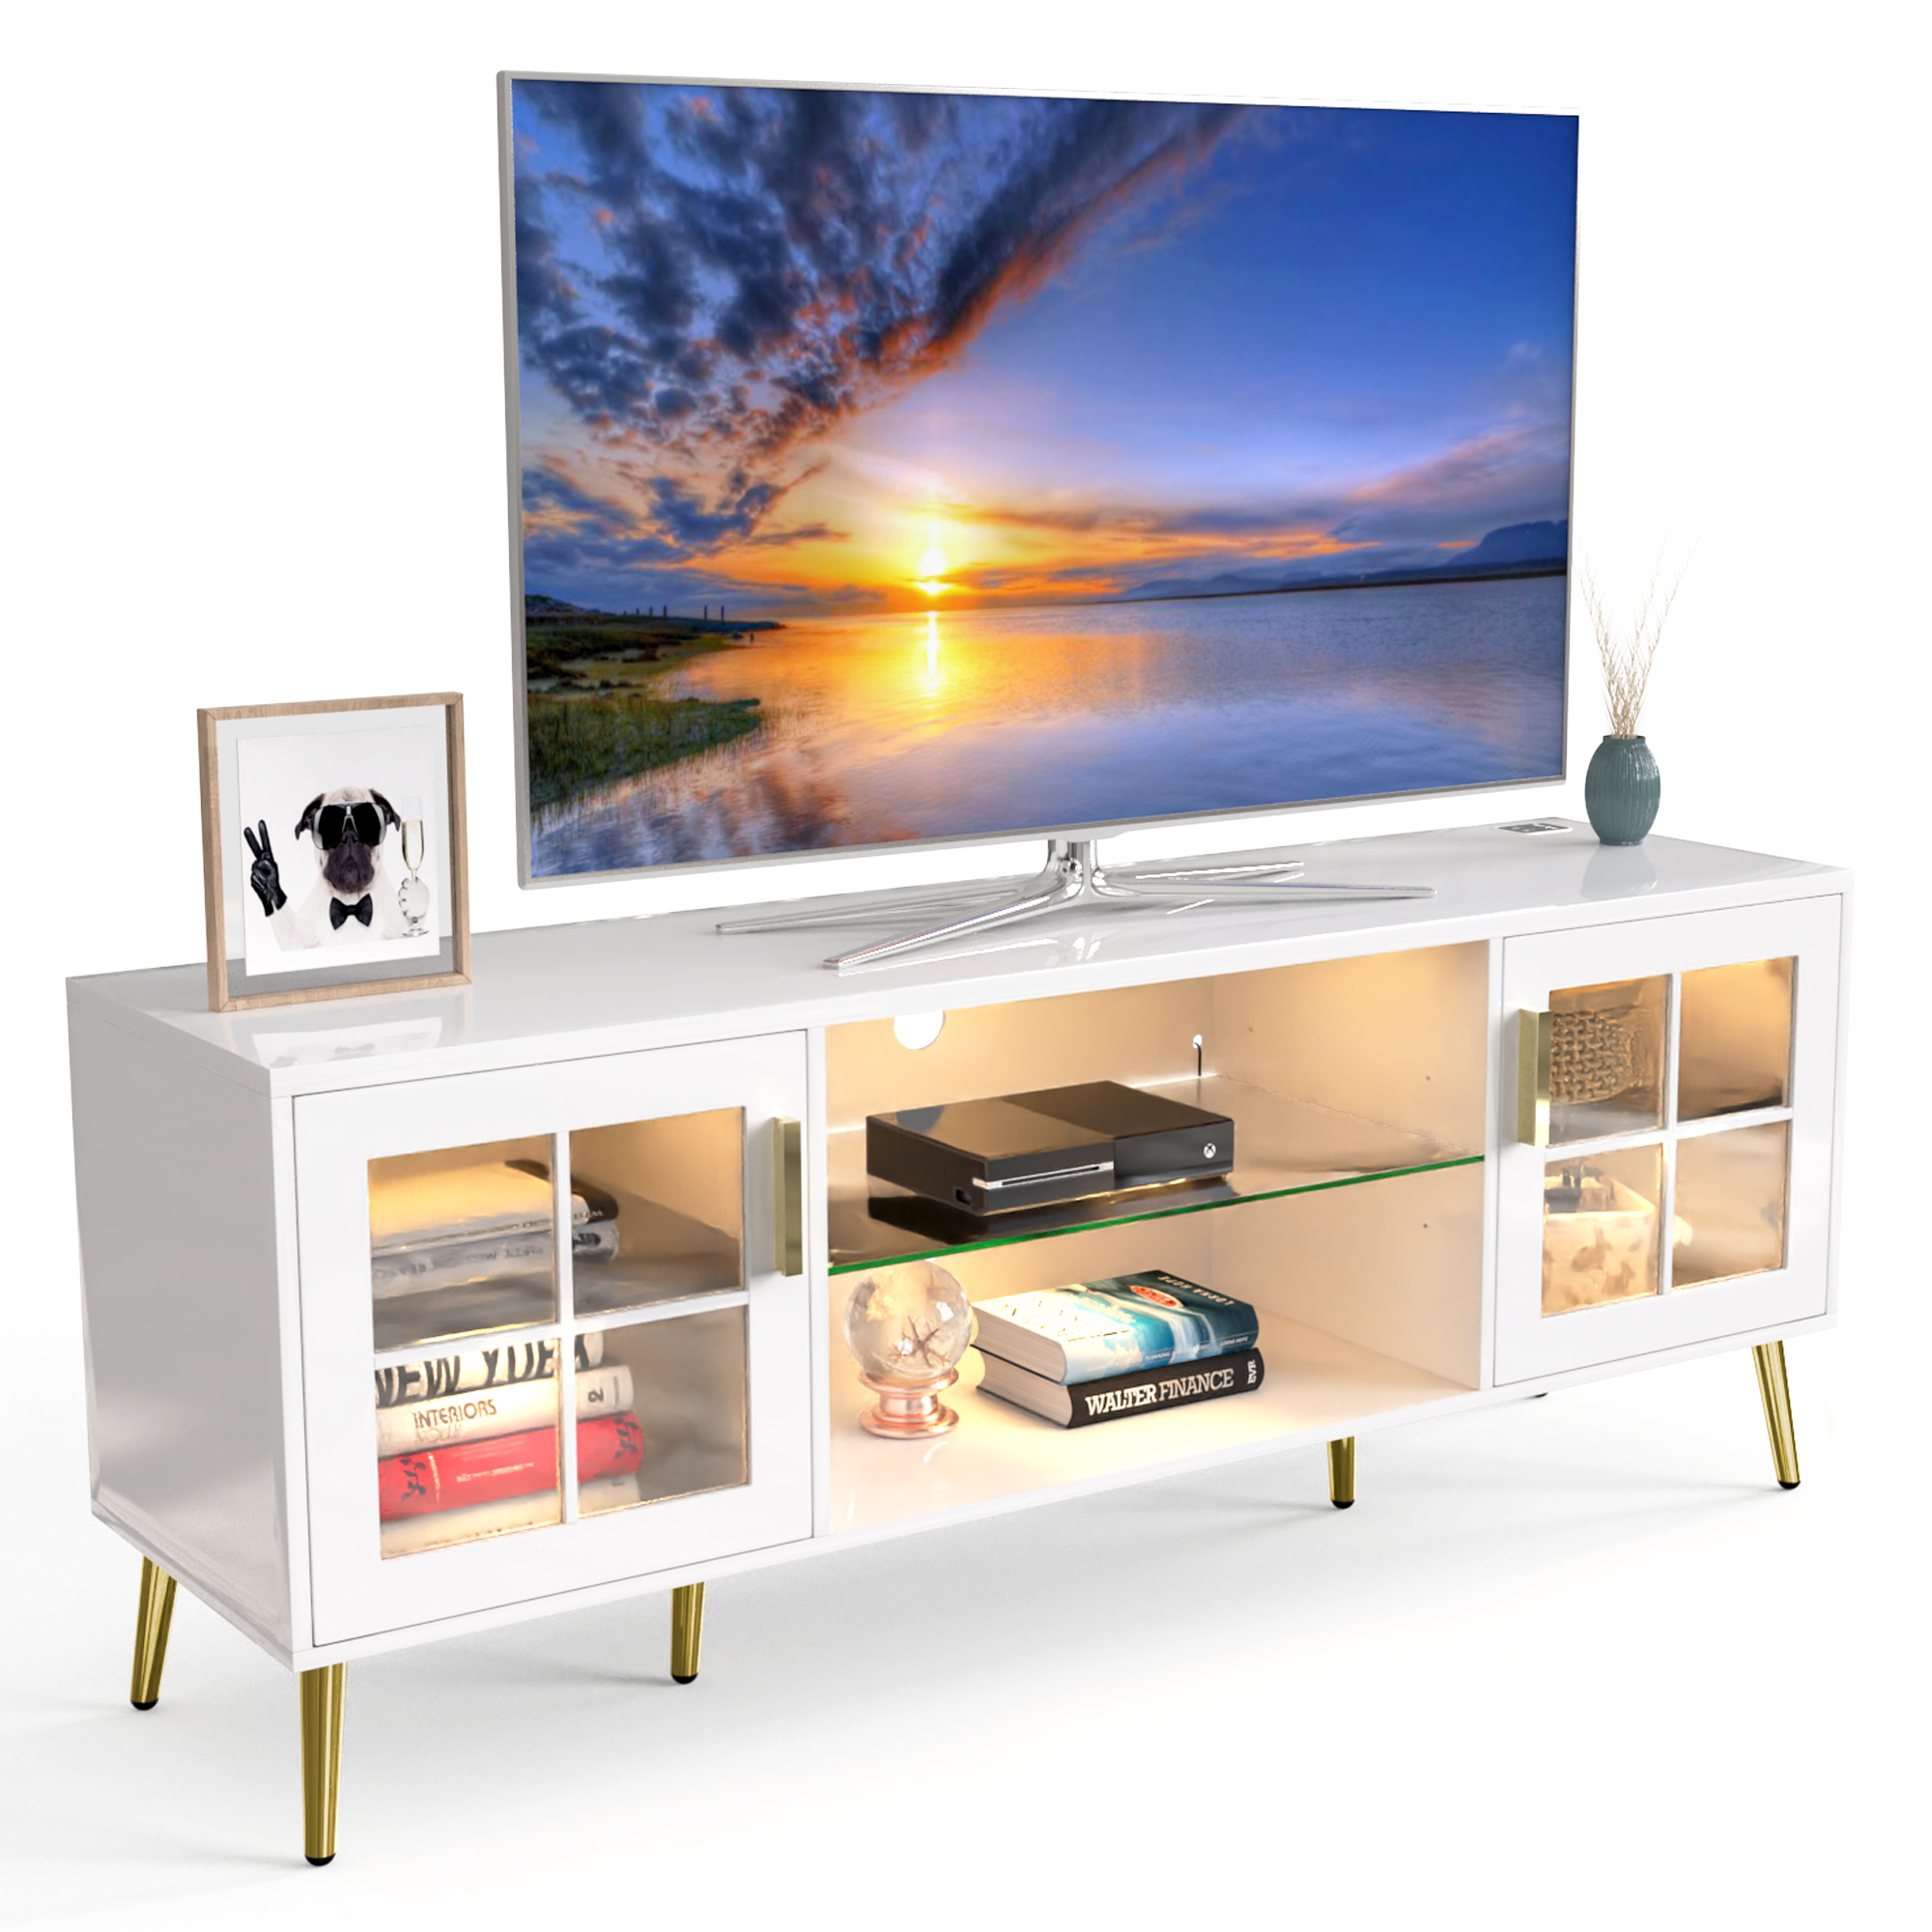 LVSOMT Television Stand With Led Lights White 65" TV